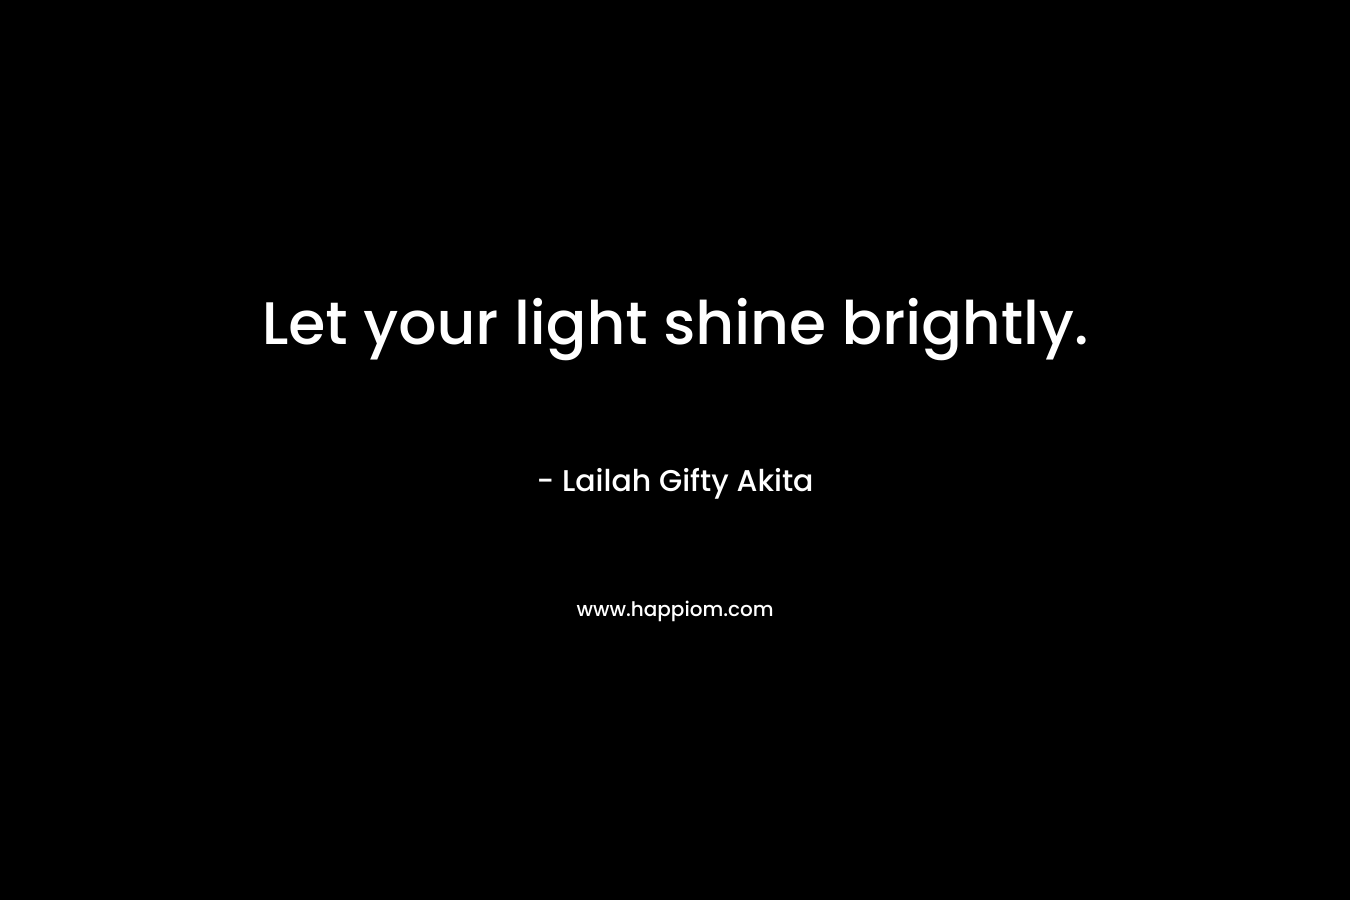 Let your light shine brightly.